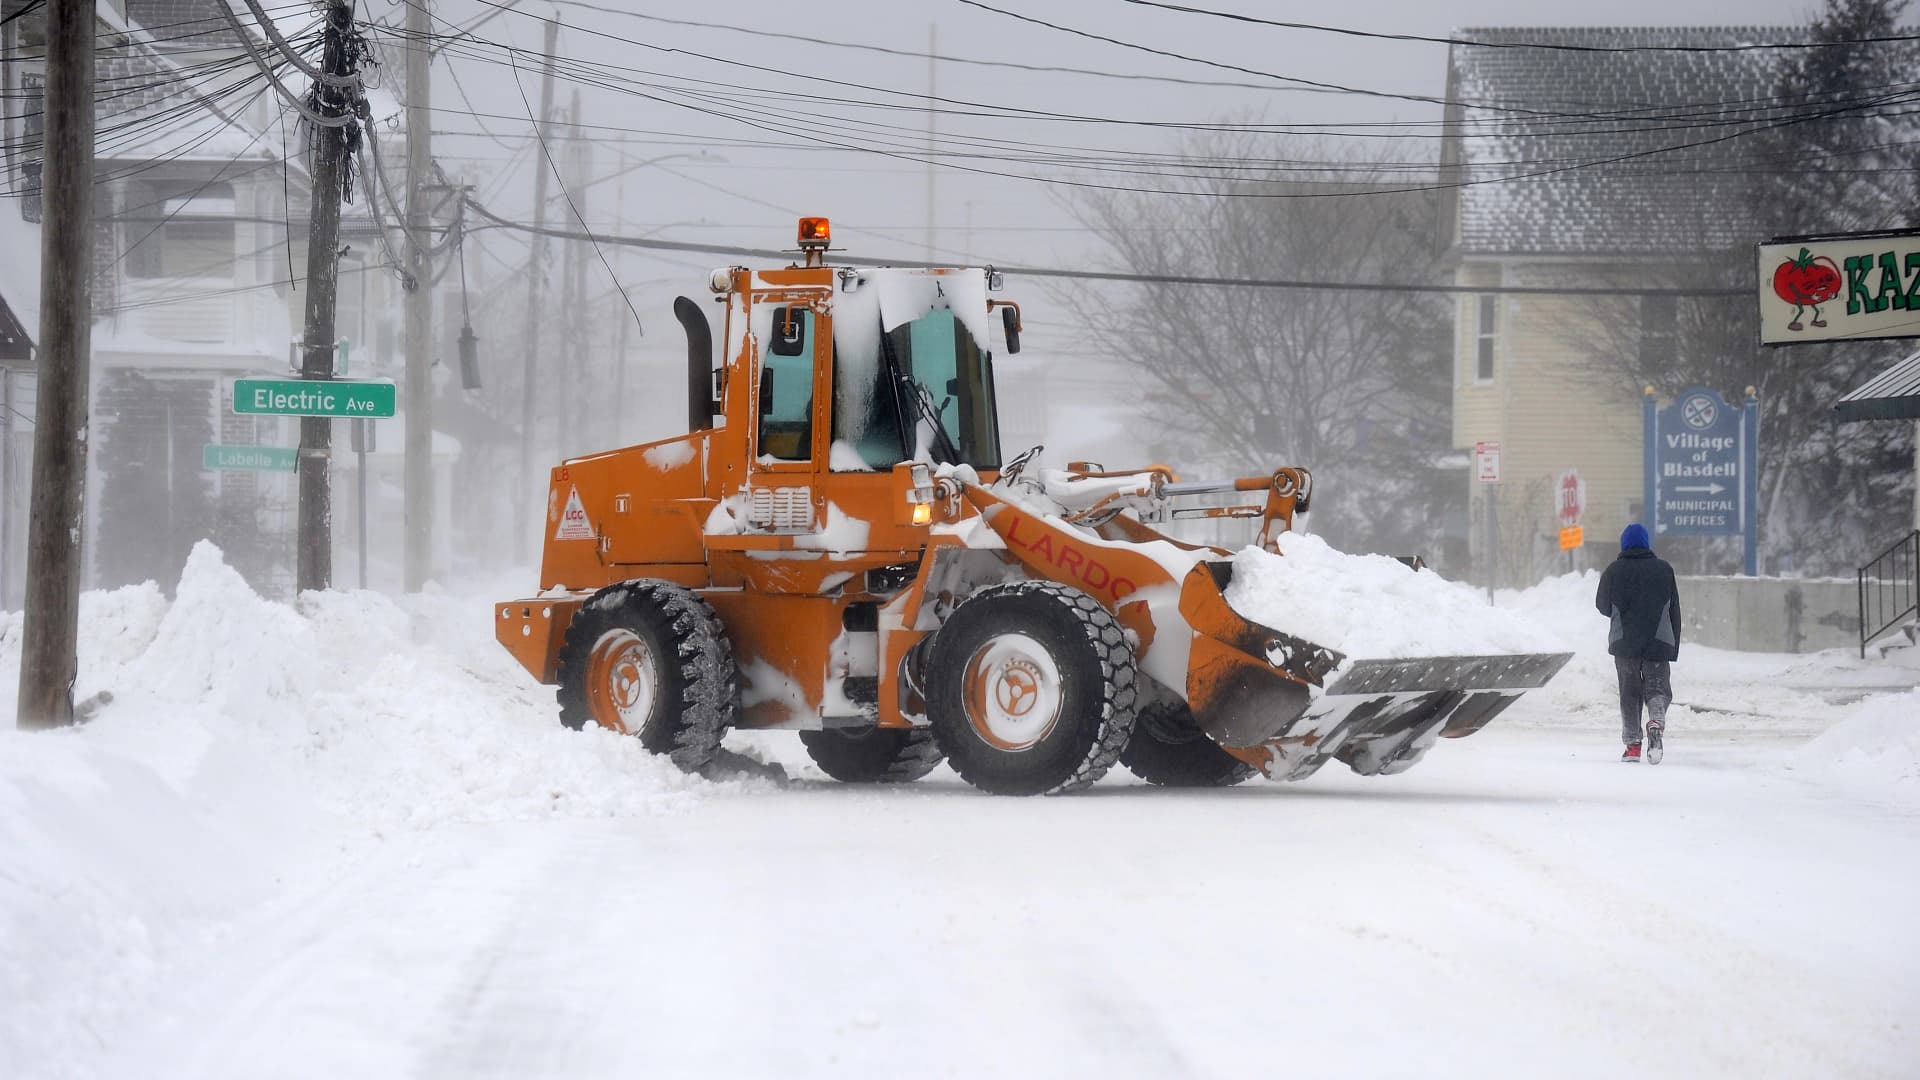 A loader clears roadways on December 24, 2022 in Hamburg, New York. The Buffalo suburb and surrounding area was hit hard by the winter storm Elliott with wind gusts over 70 miles per hour battering homes and businesses through out the holiday weekend. (Photo by John Normile/Getty Images)